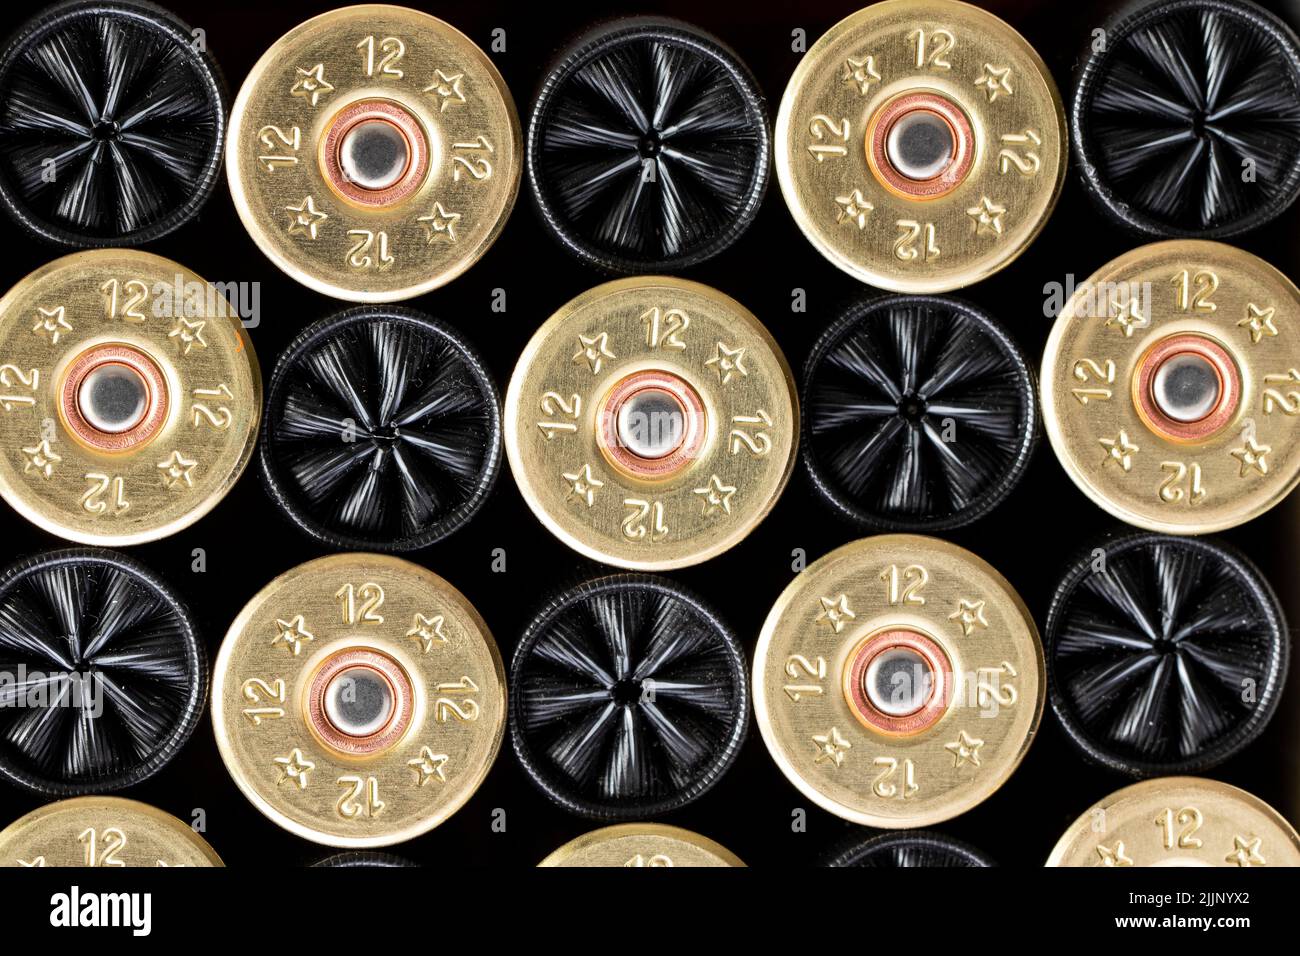 Seamless pattern of collection of shiny shotgun cartridges for hunting placed in rows on black background Stock Photo